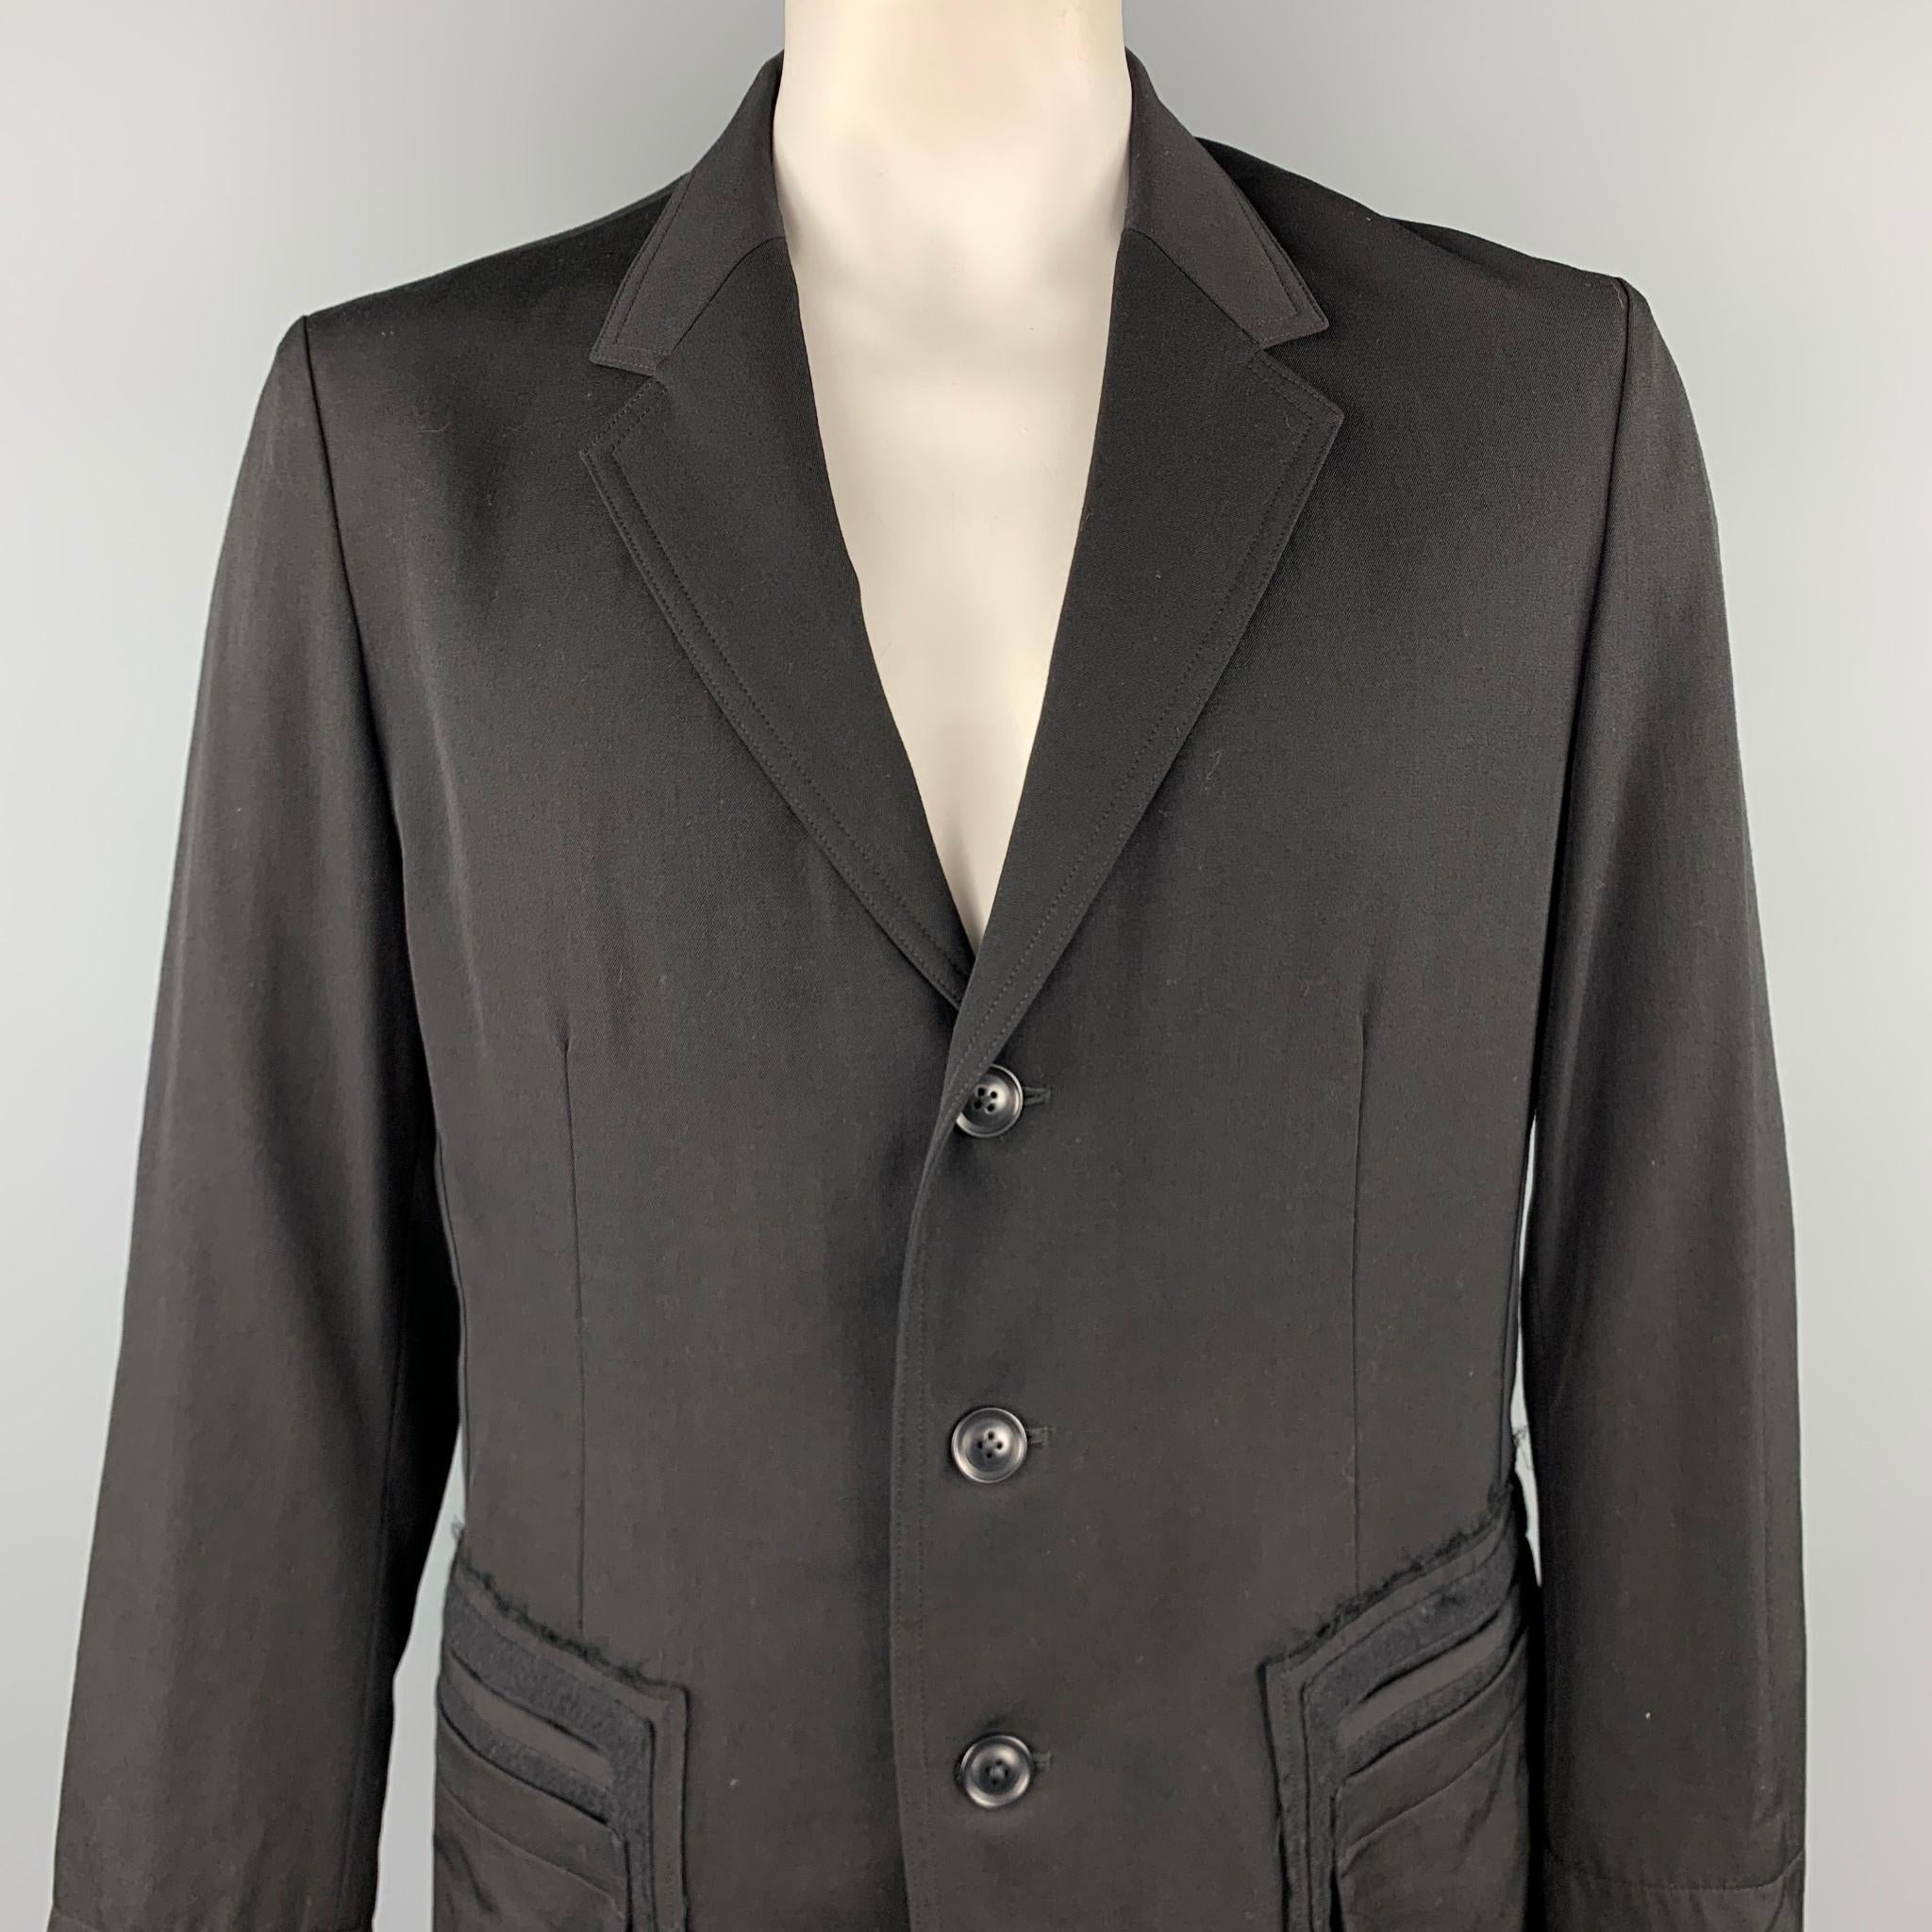 YOHJI YAMAMOTO jacket comes in a black wool featuring a notch lapel, patchwork pockets, raw edge, and a buttoned closure. Made in Japan.

Excellent Pre-Owned Condition.
Marked: JP 4

Measurements:

Shoulder: 19 in. 
Chest: 42 in. 
Sleeve: 25 in.